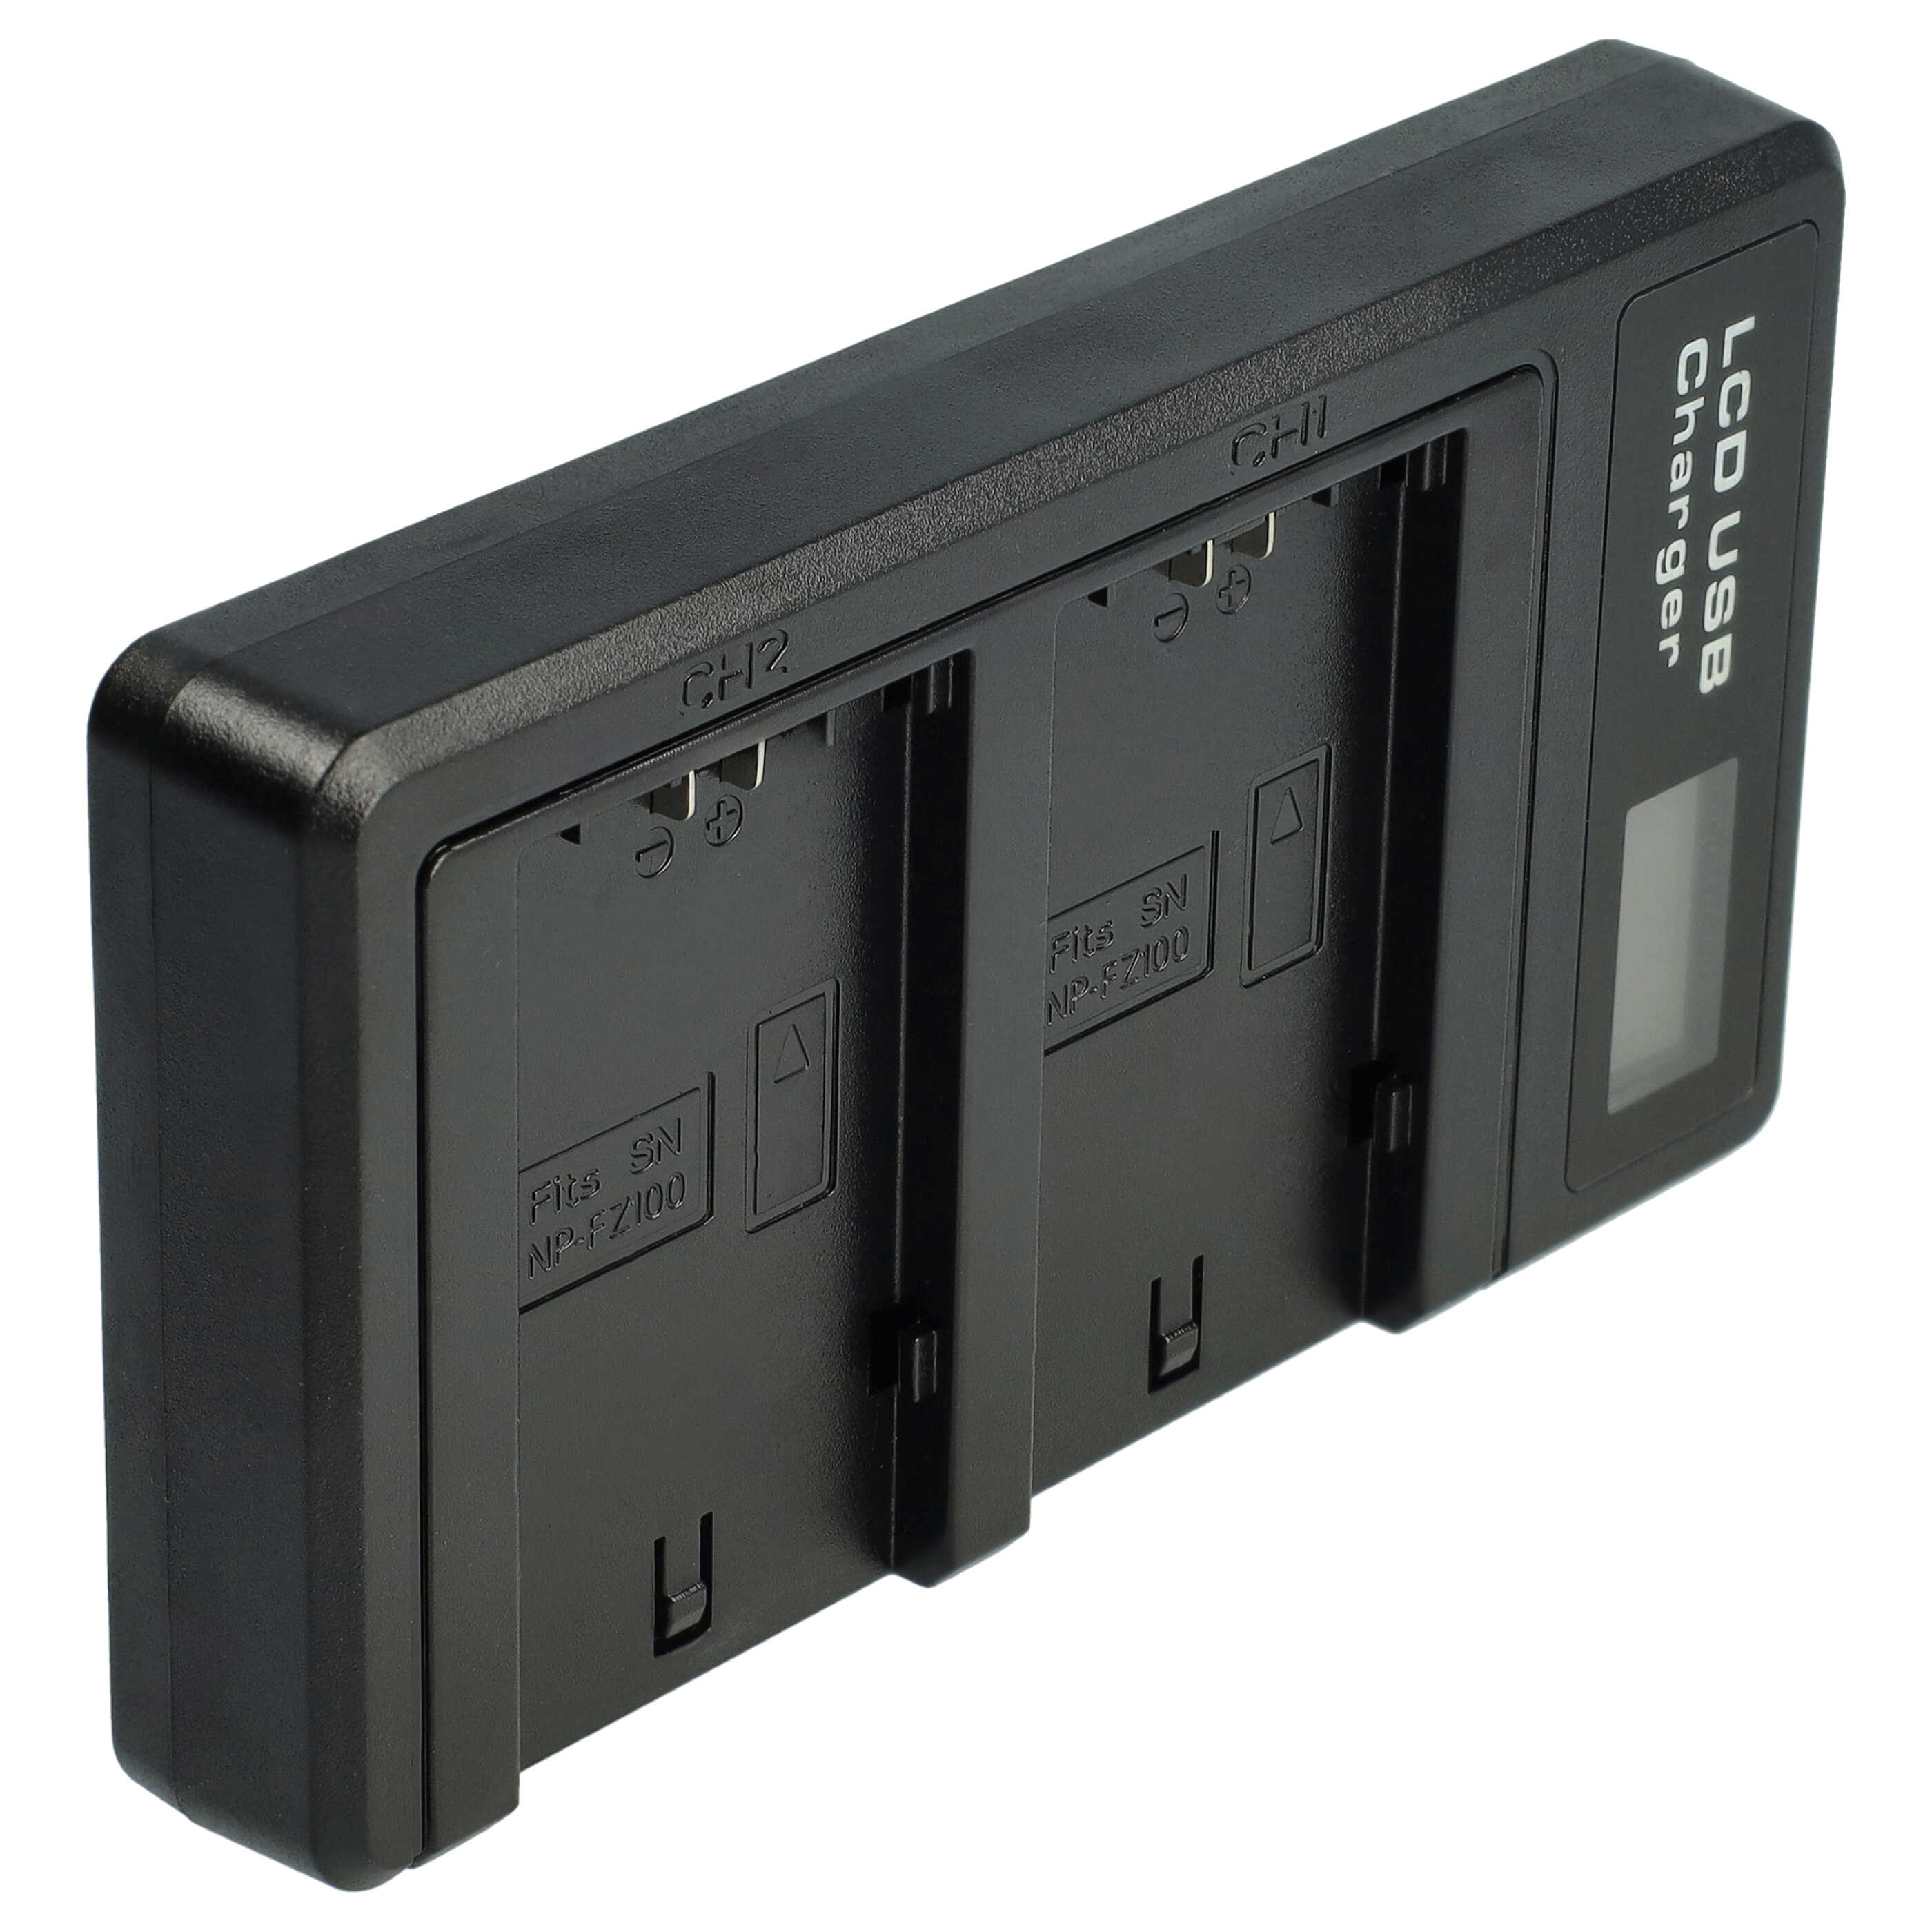 Battery Charger suitable for Sony NP-FZ100 Camera etc. - 0.5 A, 8.4 V